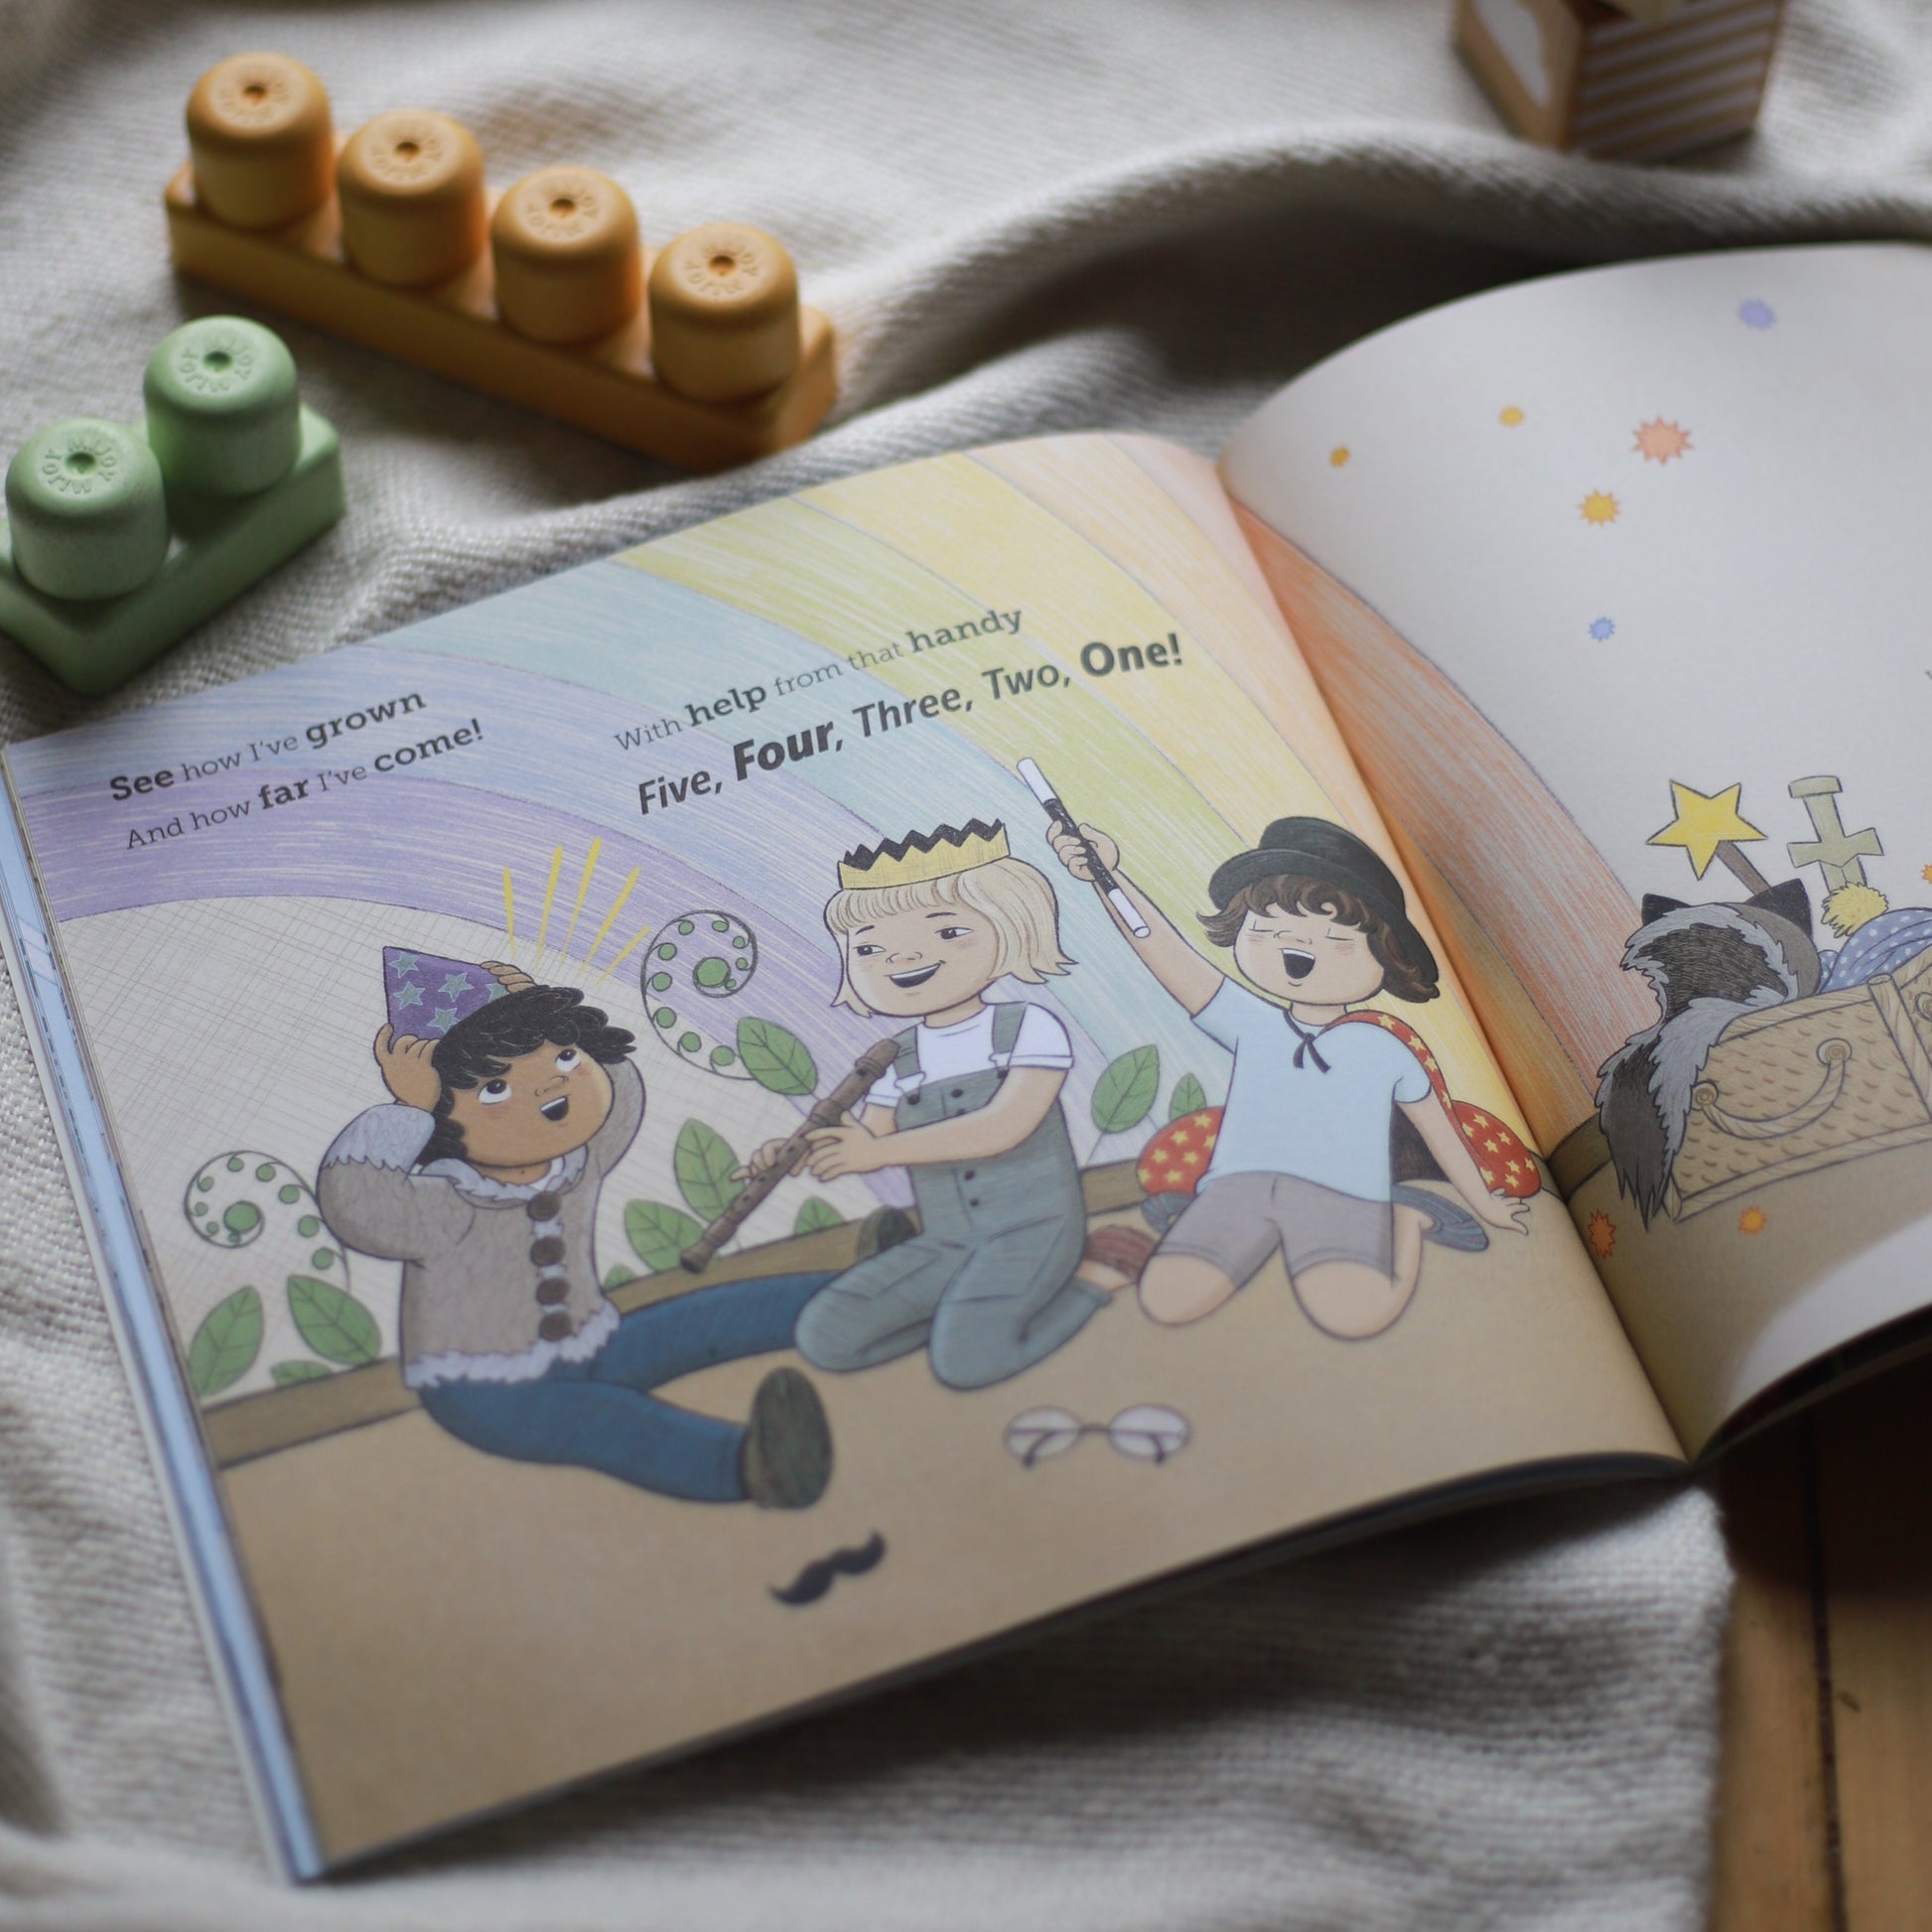 Page in the book showing three kids playing make-believe.